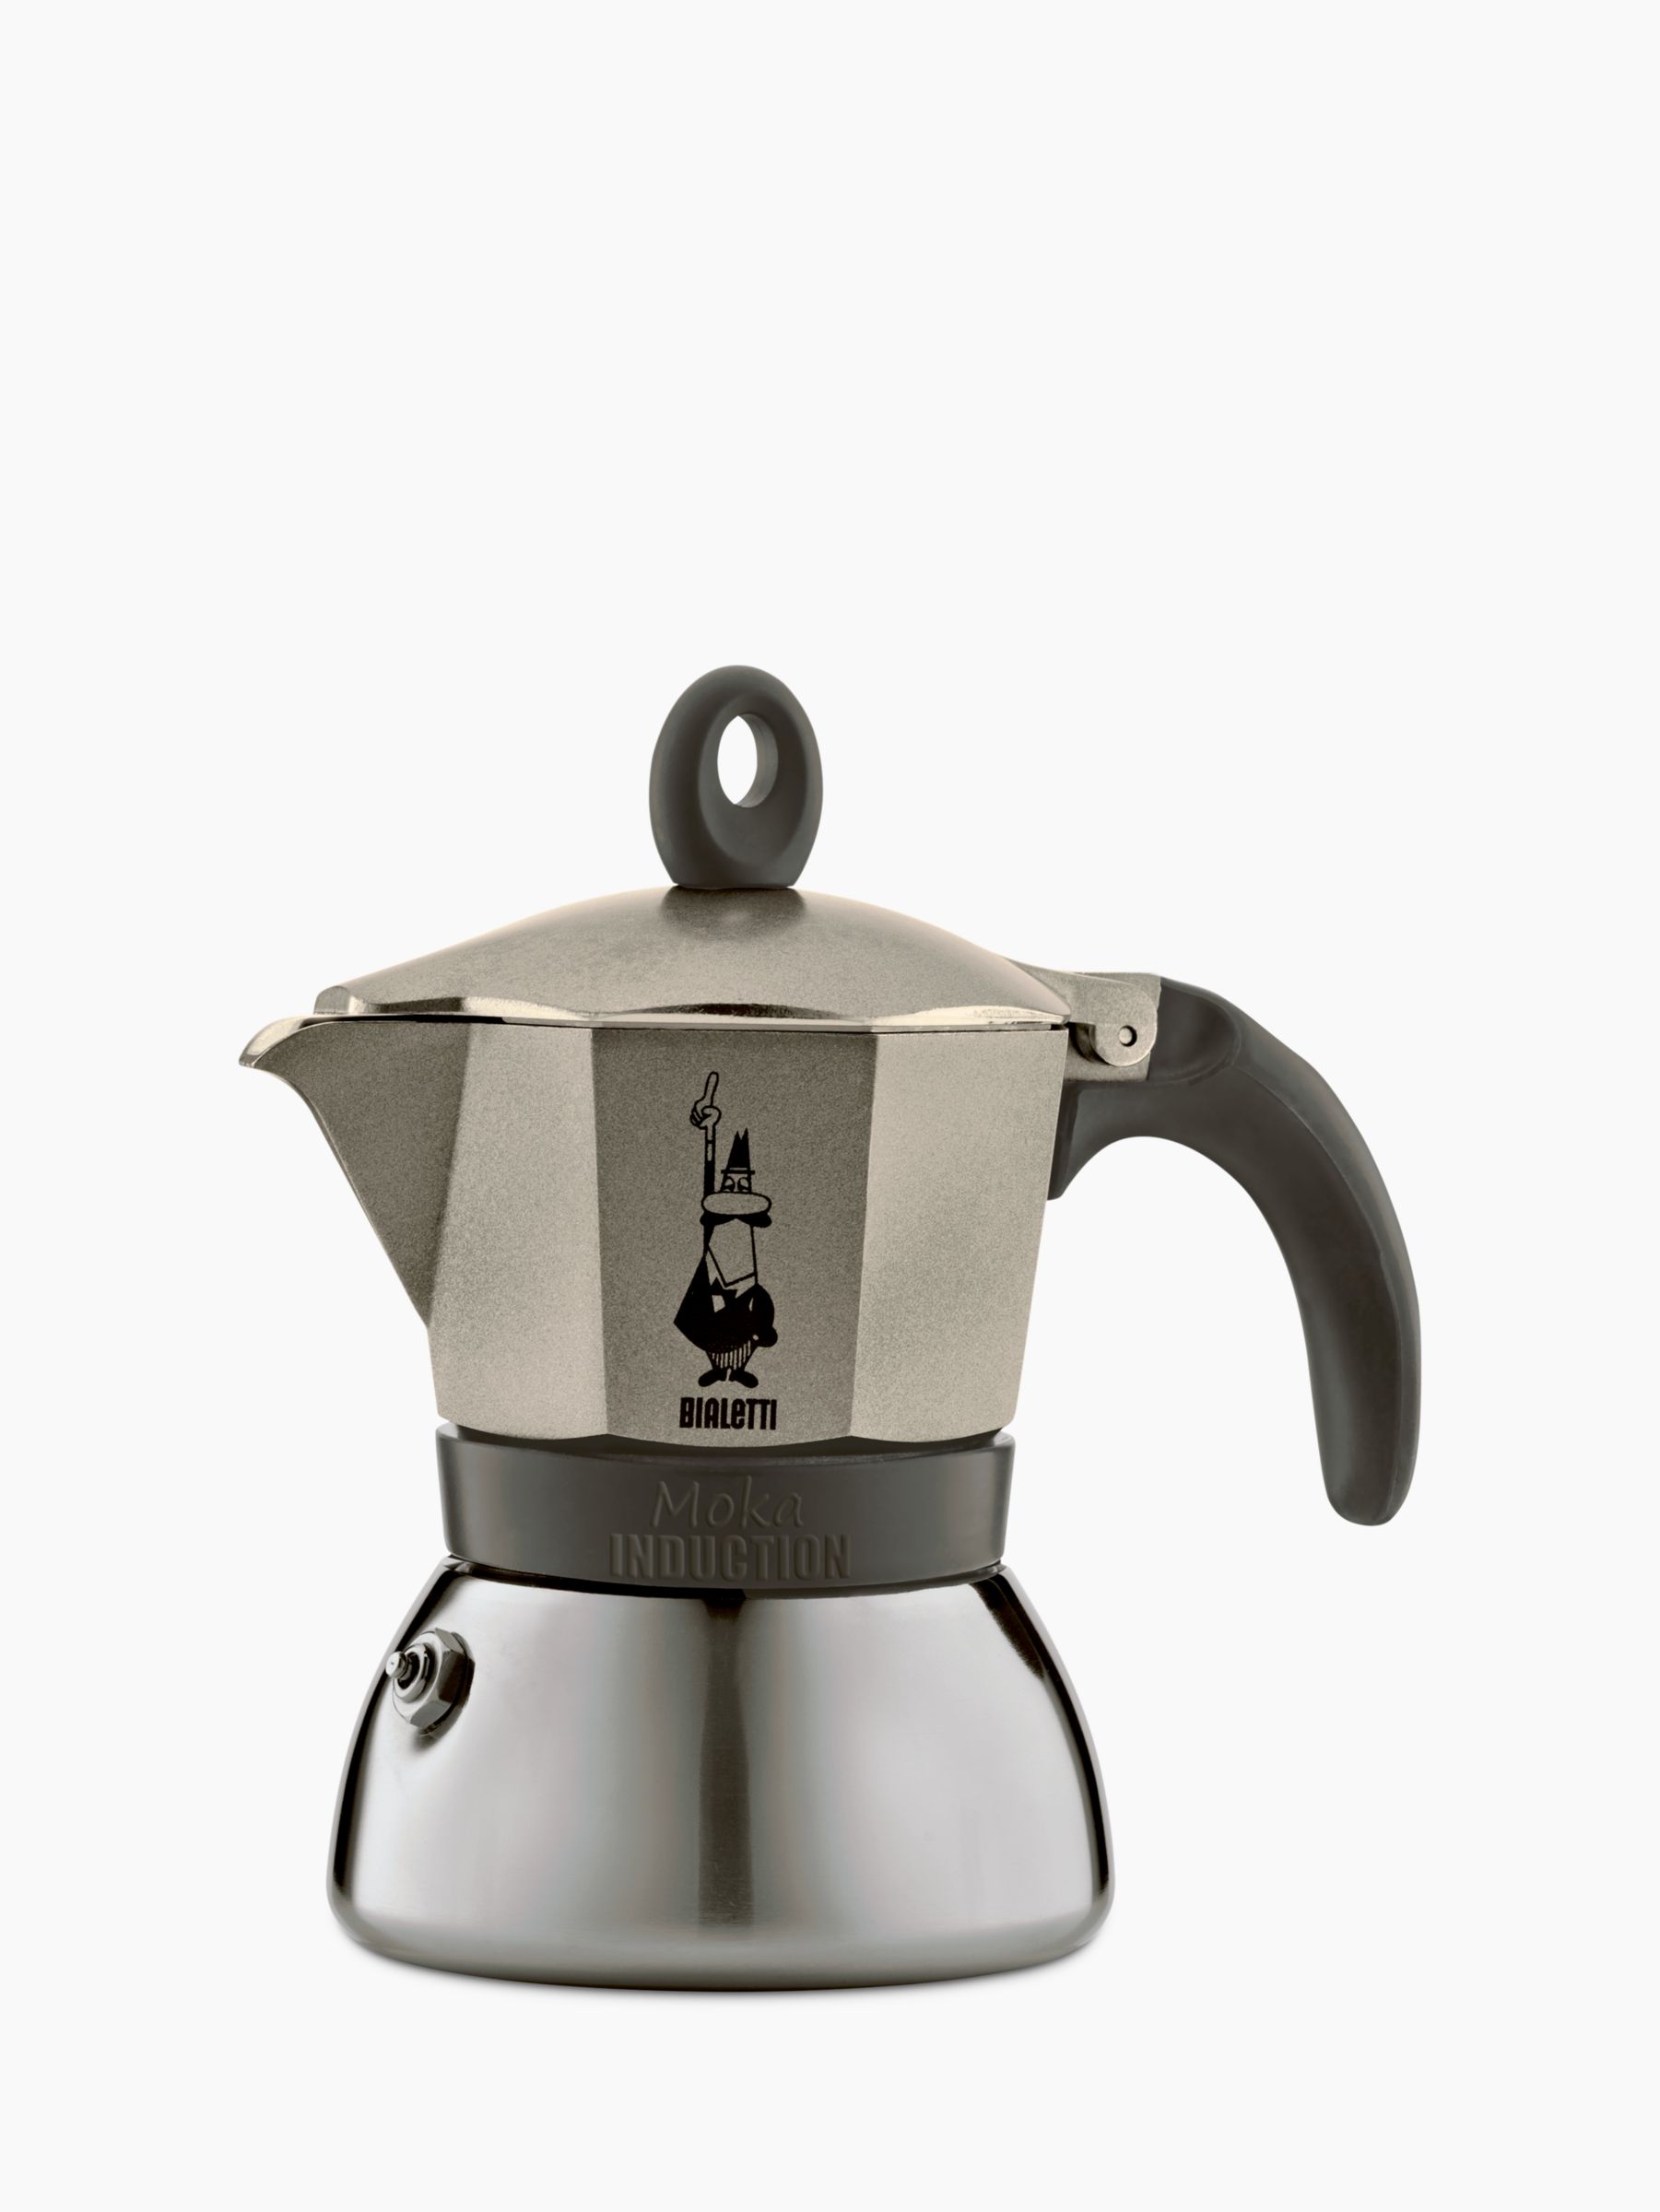 Bialetti Moka Induction Coffee Maker 6 Cup At John Lewis Partners